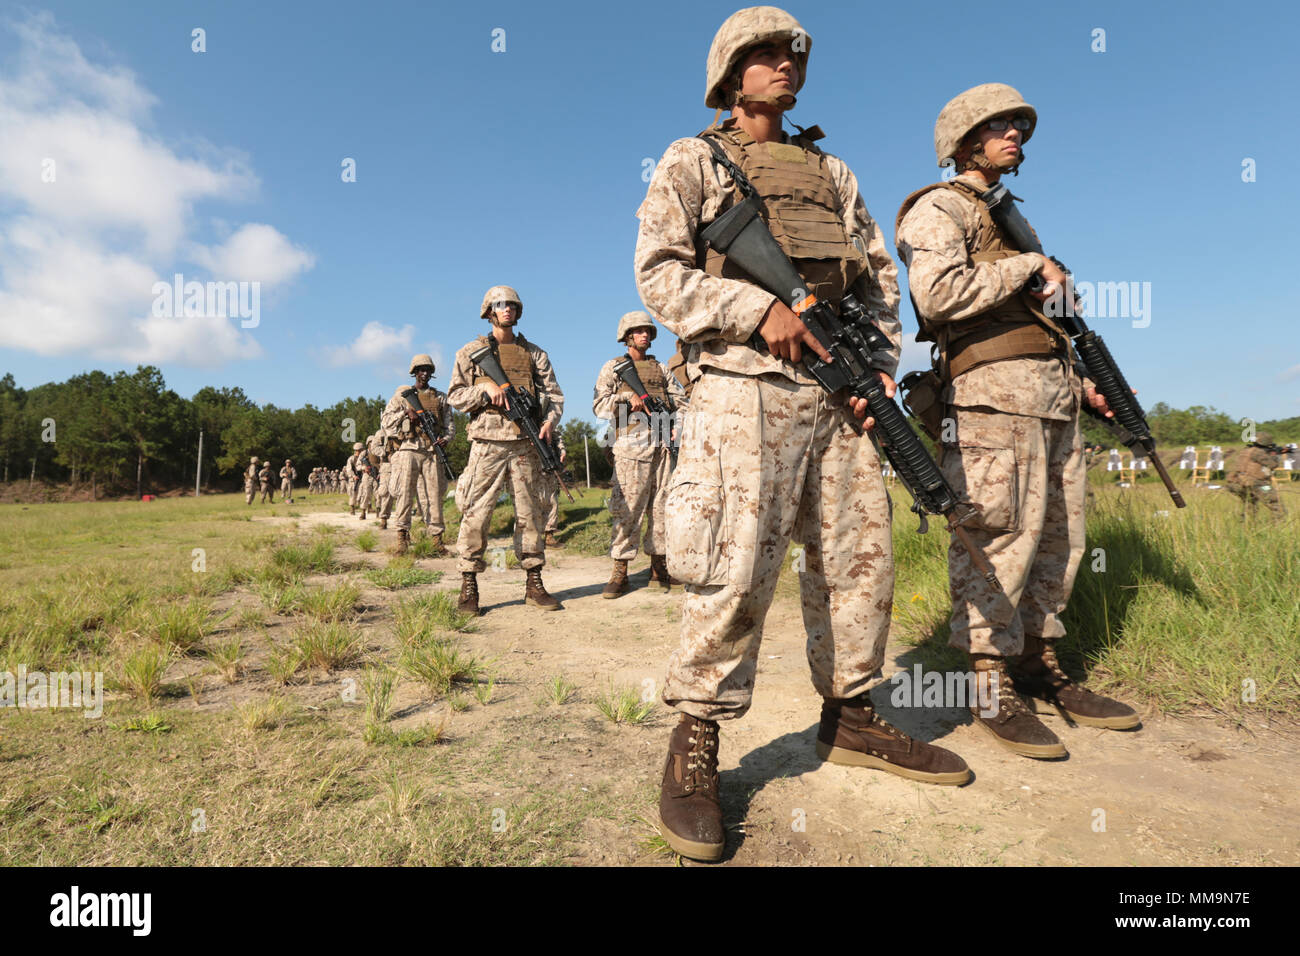 U.S. Marine Corps Rcts. Robert Howell (left), with platoon 2078, and John Hill with platoon 2076, Golf Company, 2nd Recruit Training Battalion, wait for instruction during Table 2 practice at Hue City Range on Marine Corps Recruit Depot, Parris Island, S.C., Sept. 14, 2017. Table two qualifications with the M16 Rifle teaches recruits to understand the weapon system in order to keep with the concept 'Every Marine a Rifleman'. (U.S. Marine Corps photo by Lance Cpl. Sarah Stegall/Released) Stock Photo